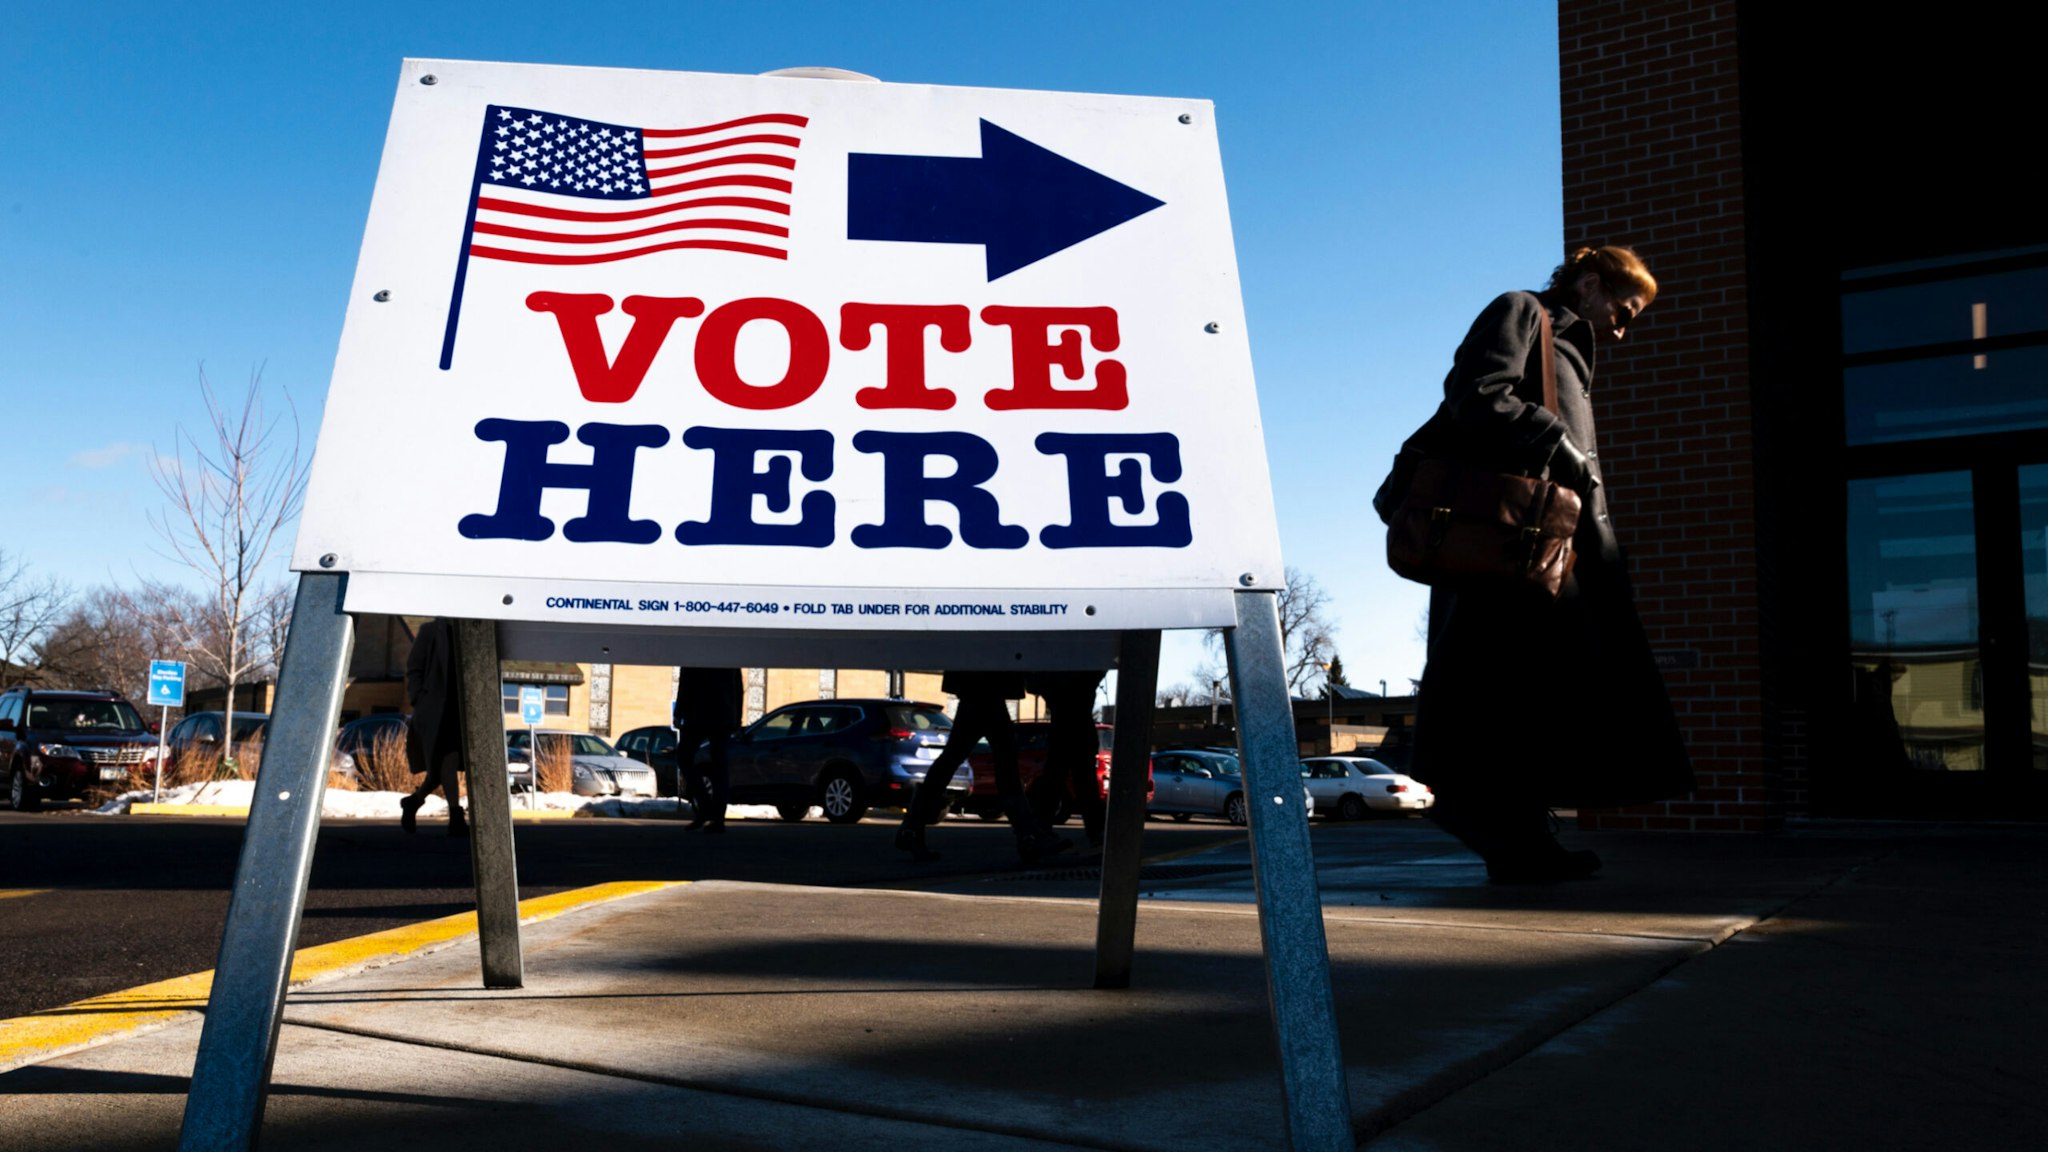 A voter arrives at a polling place on March 3, 2020 in Minneapolis, Minnesota. 1,357 Democratic delegates are at stake as voters cast their ballots in 14 states and American Samoa on what is known as Super Tuesday.